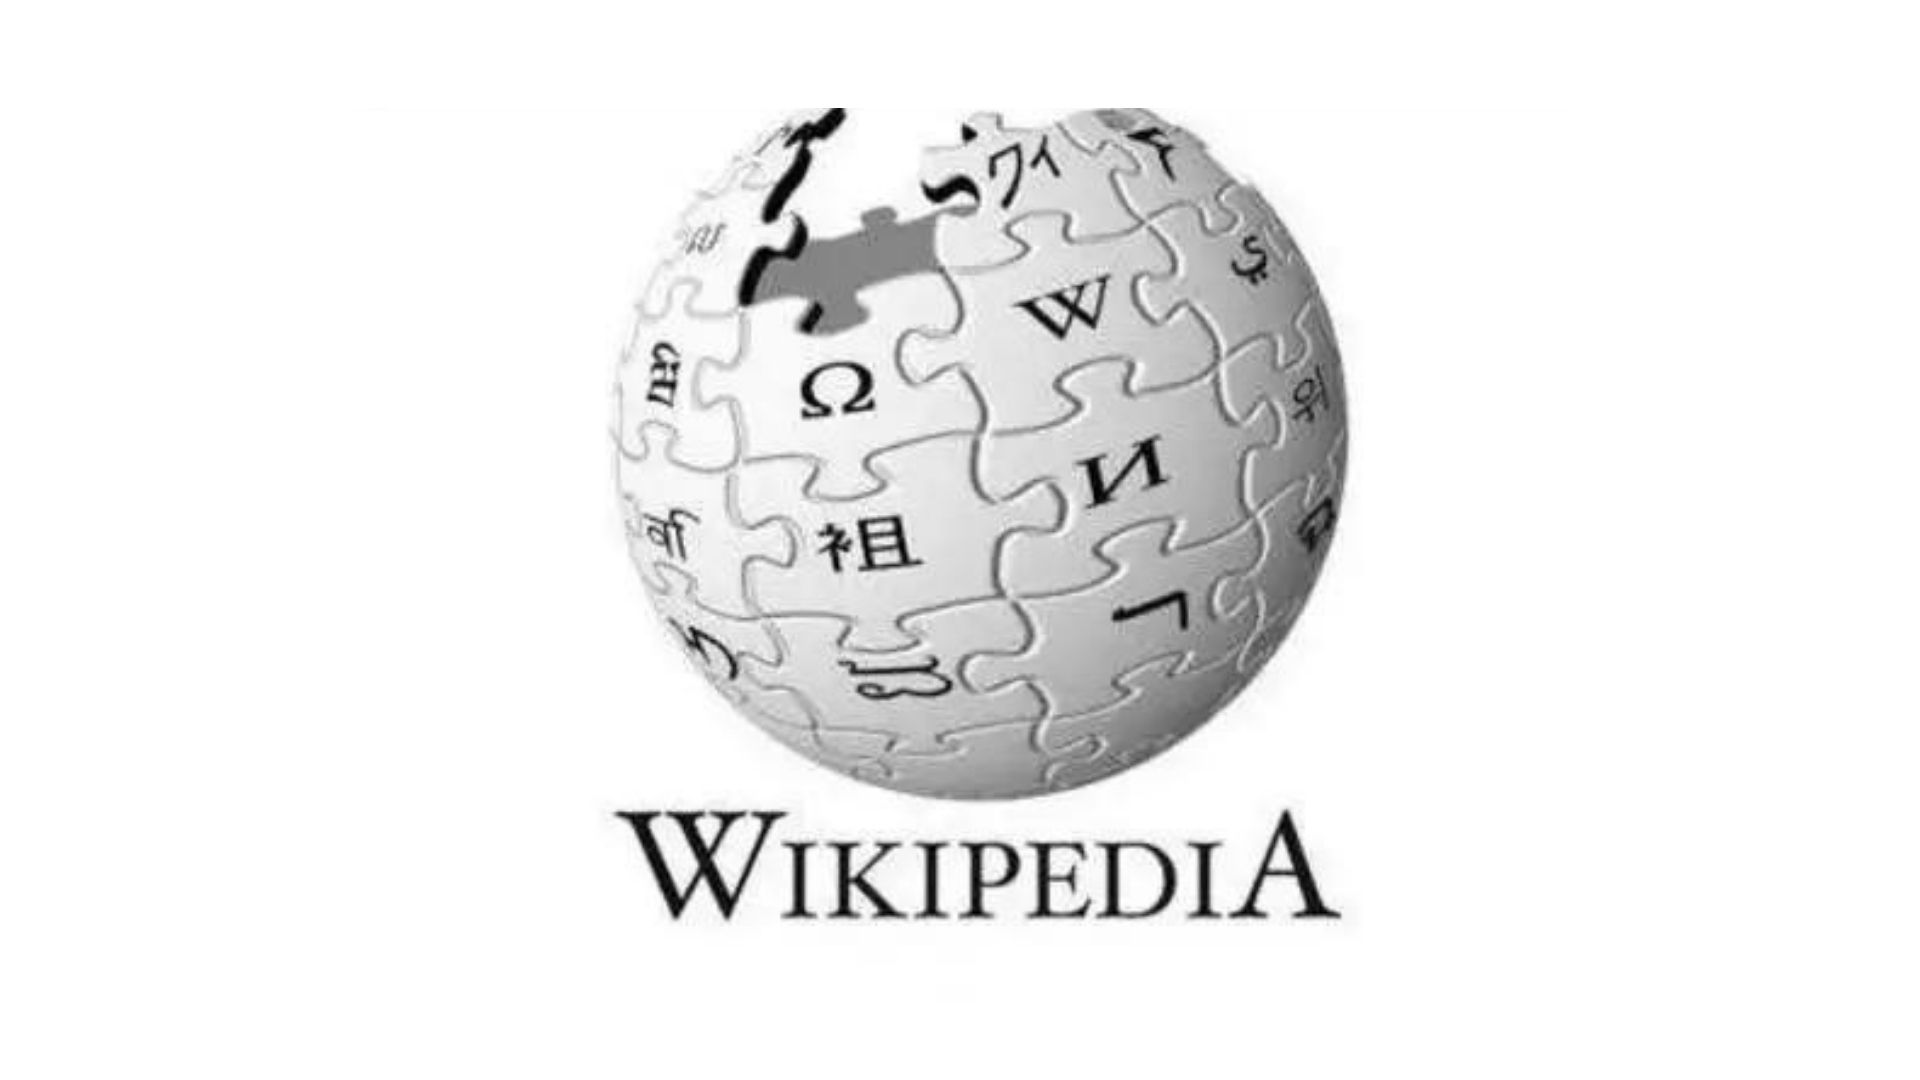 Auction of Wikipedia's editor's first computer and NFT is On